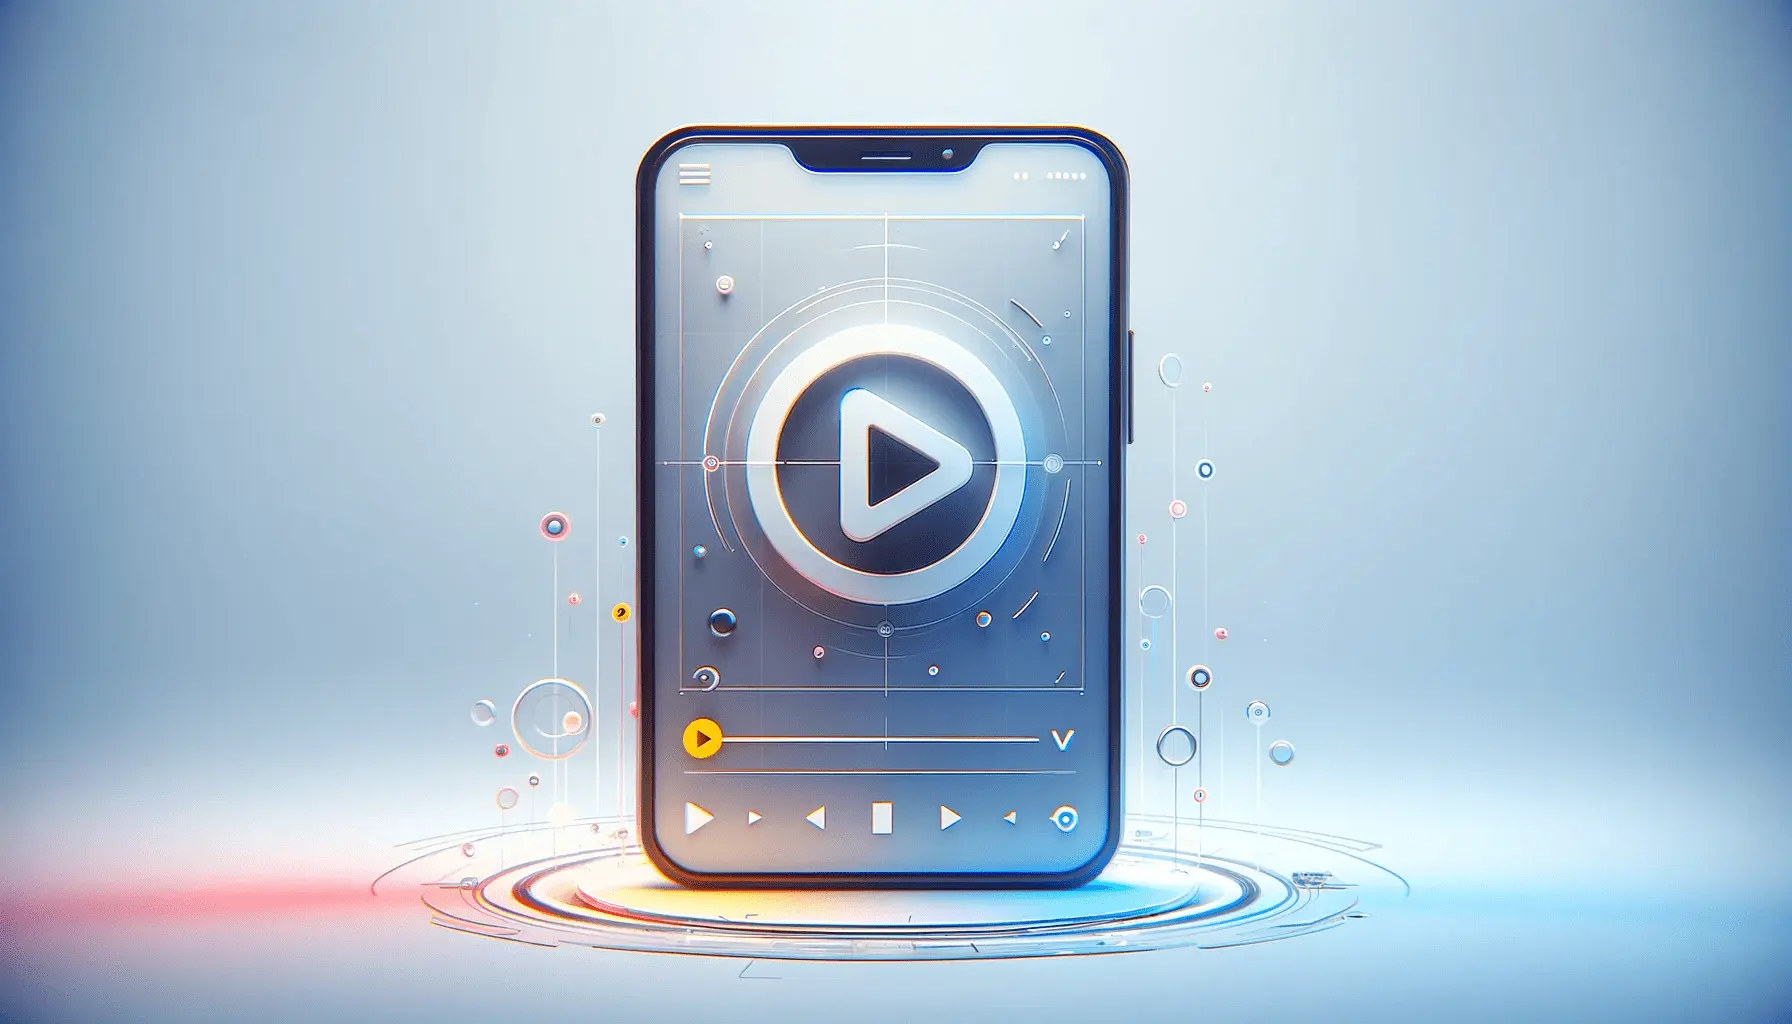 Video Previews: How to Effectively Use Them in Your App Listing